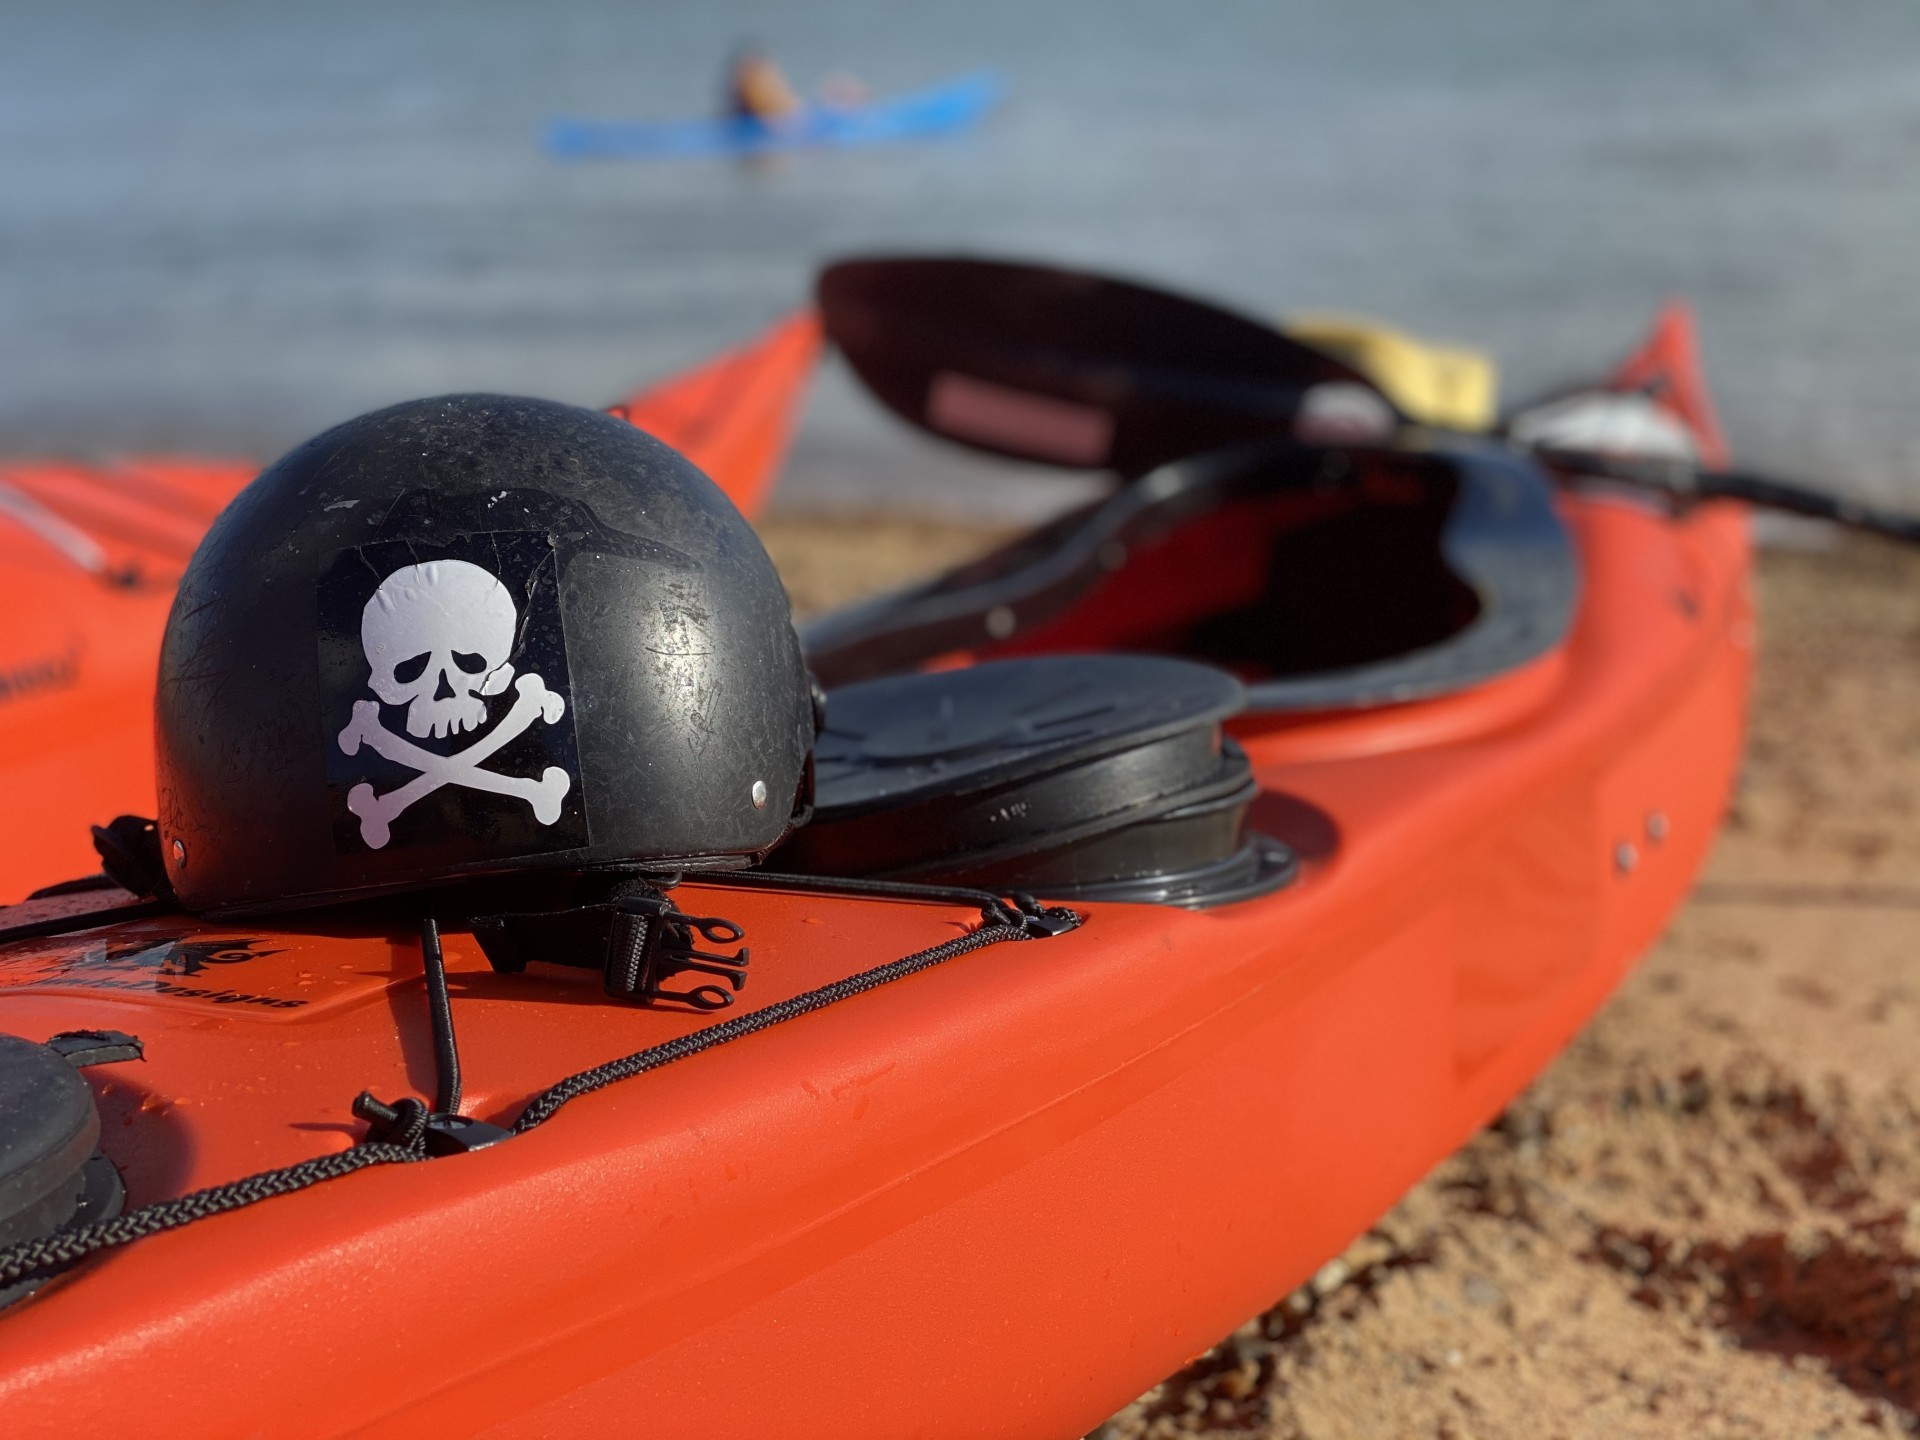 Red Sea kayak with a black helmet on the deck on a sandy beach in Suffolk.